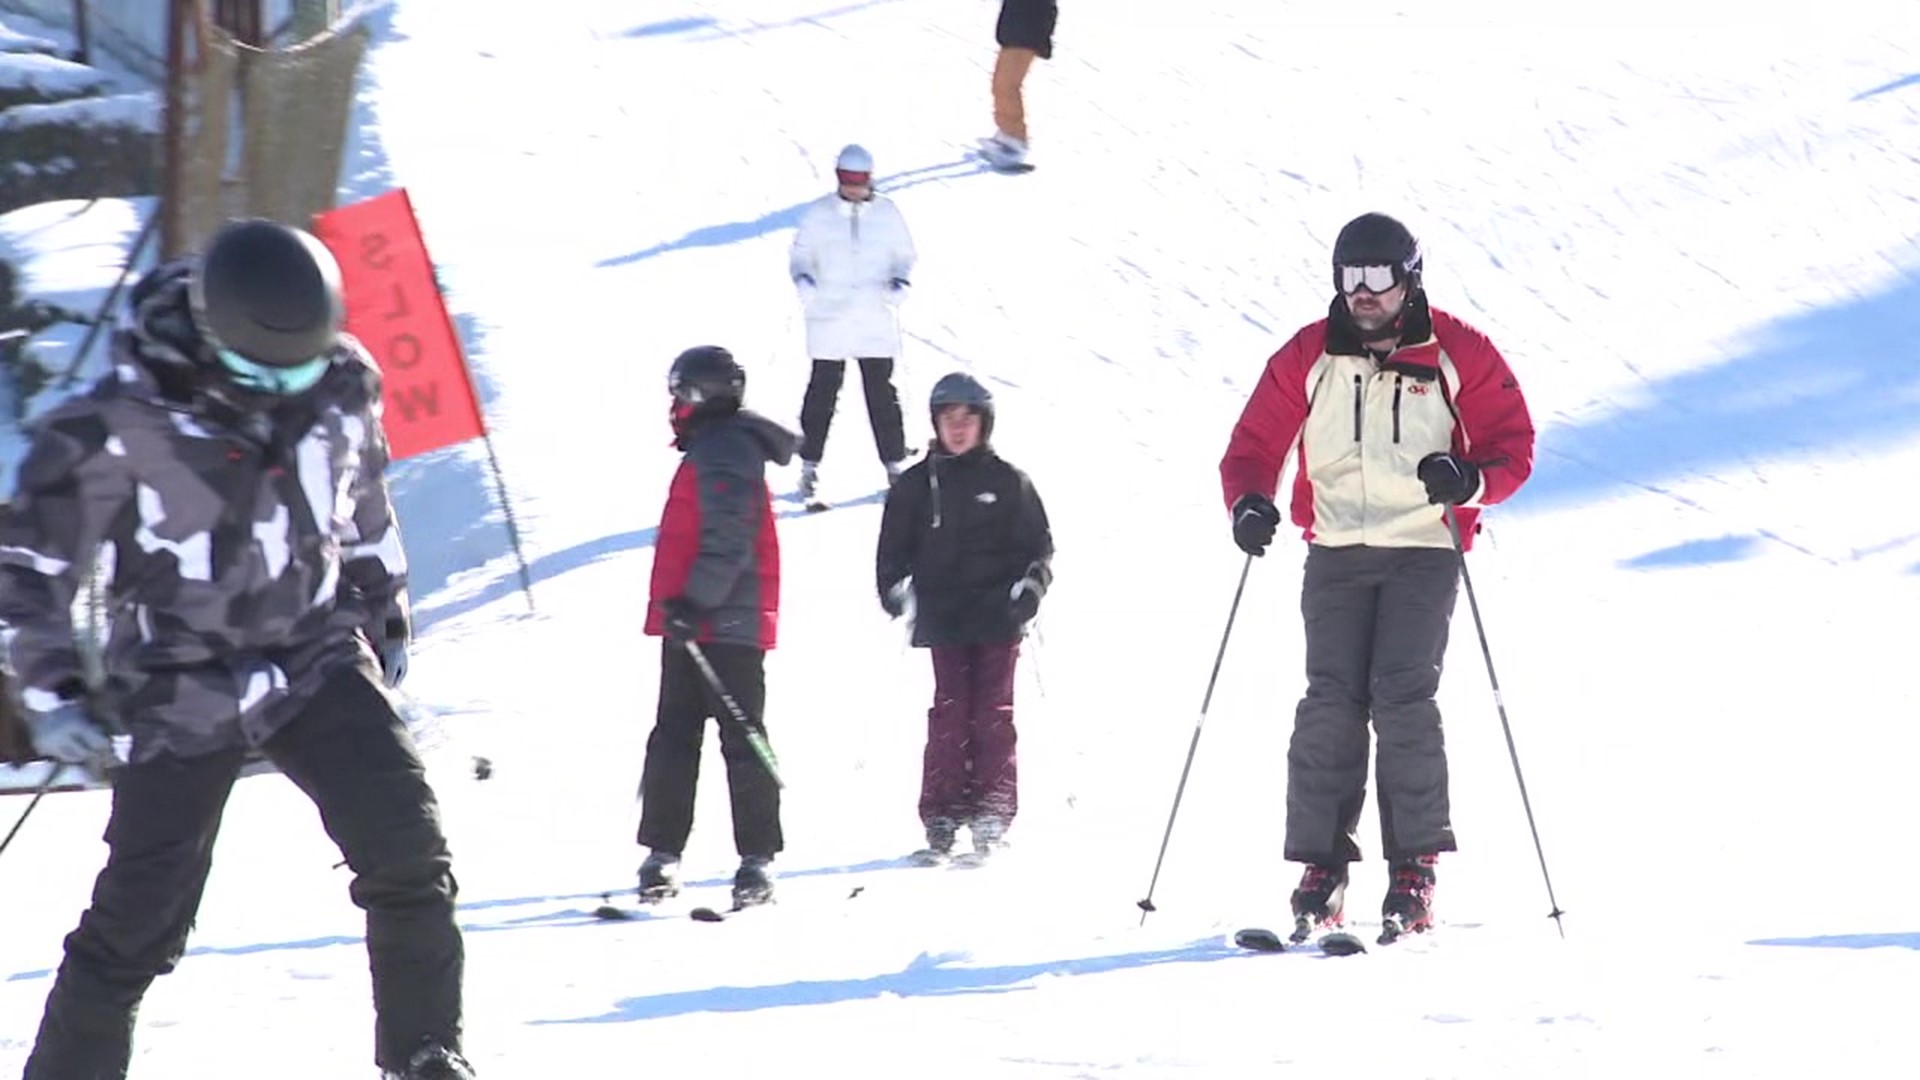 Five more ski trails and tubing lanes will be open and an additional ski lift will also be running to help get people to the top of the mountain faster.